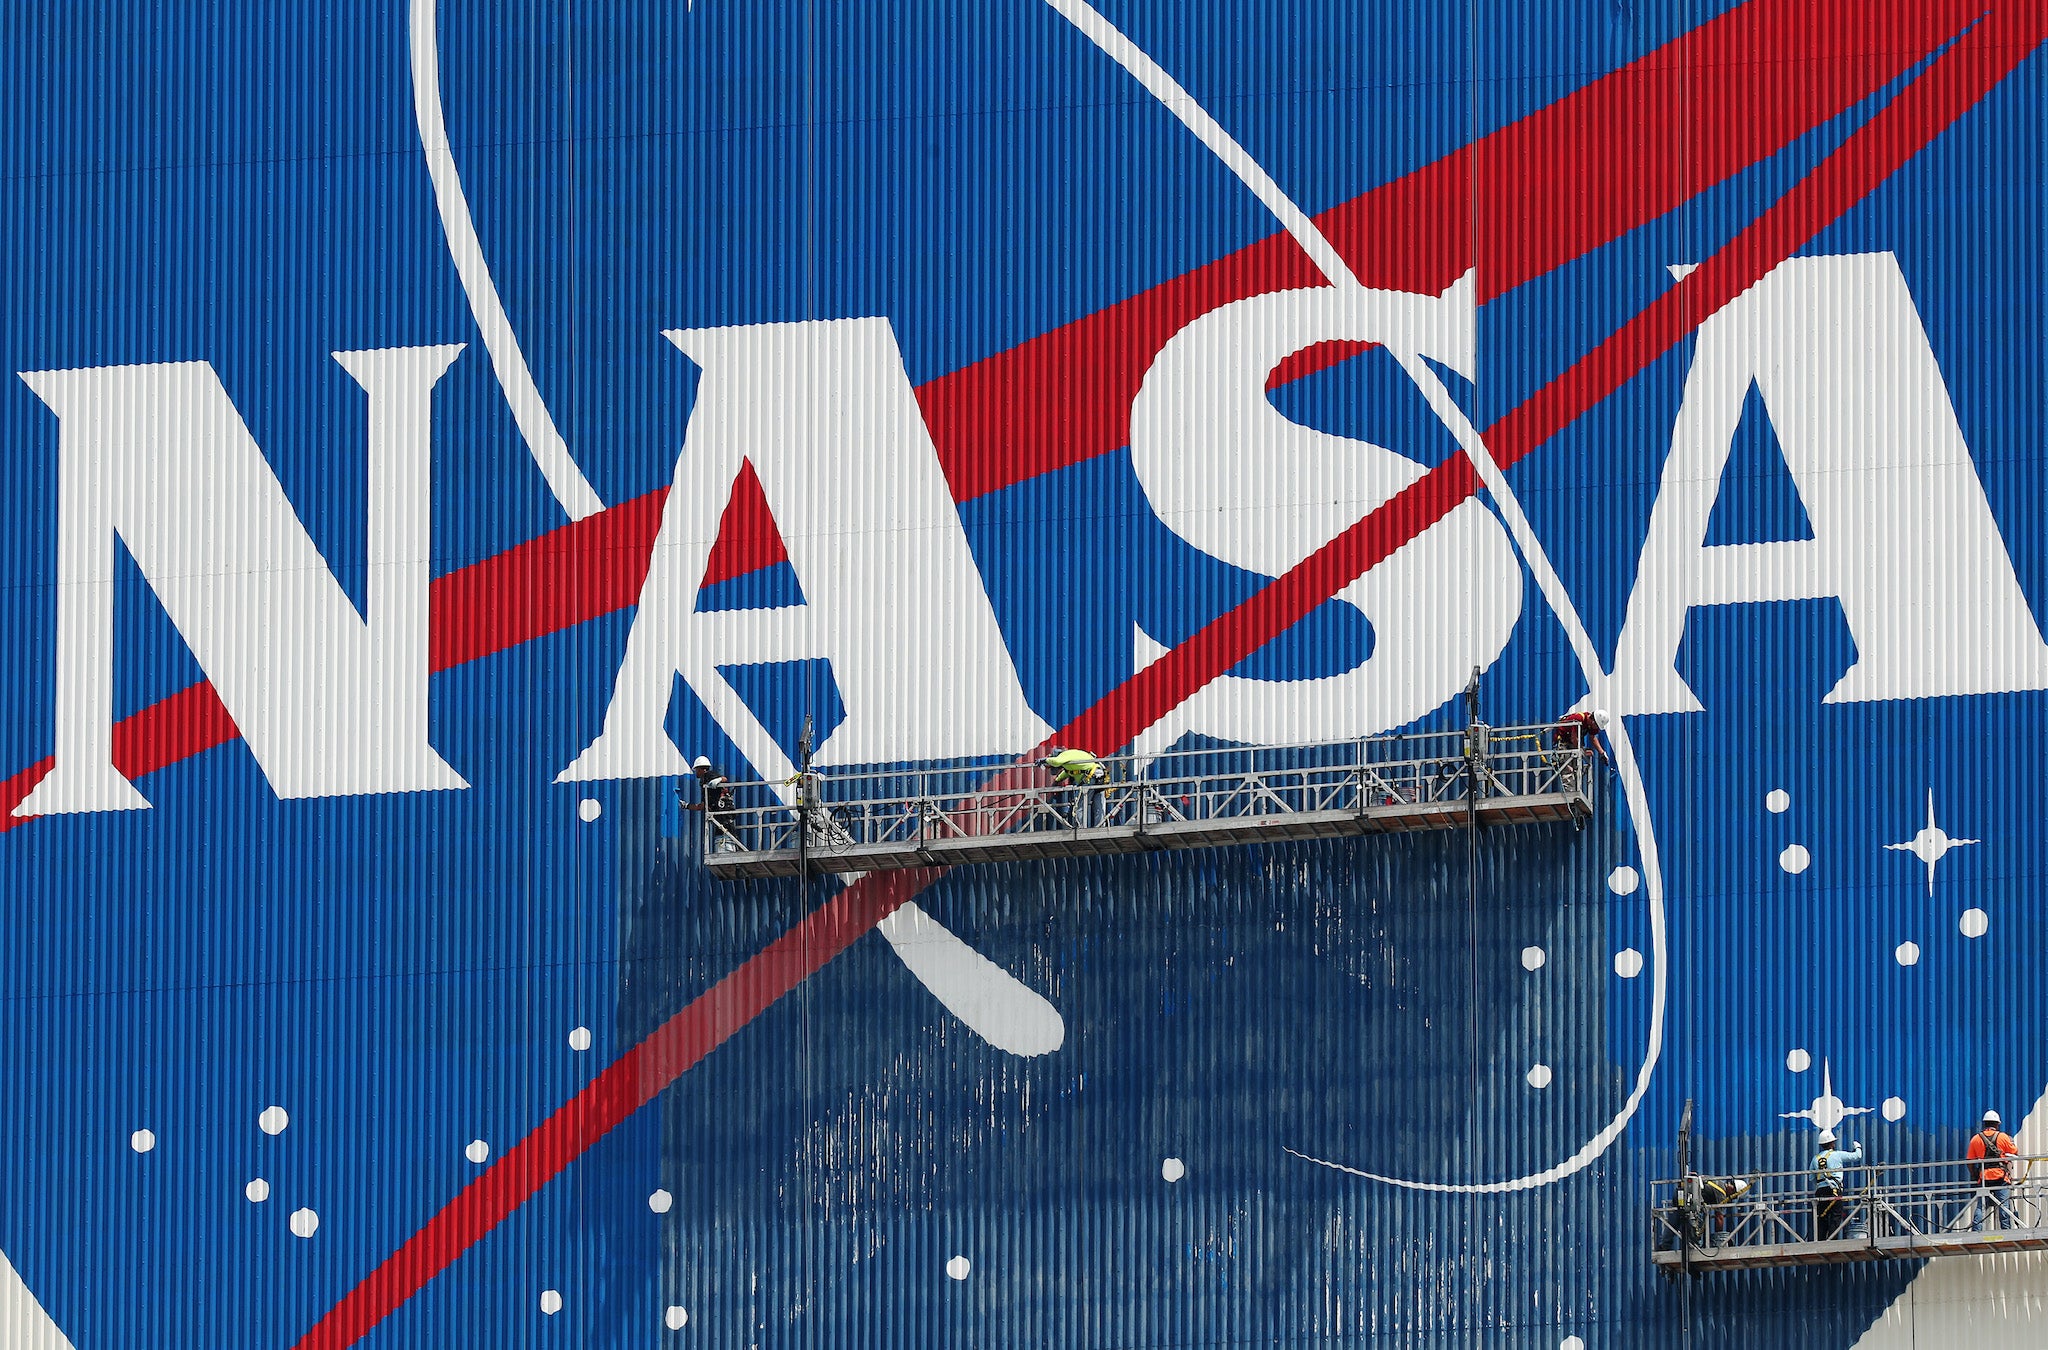 NASA is stoking excitement and fear with a mysterious tweet